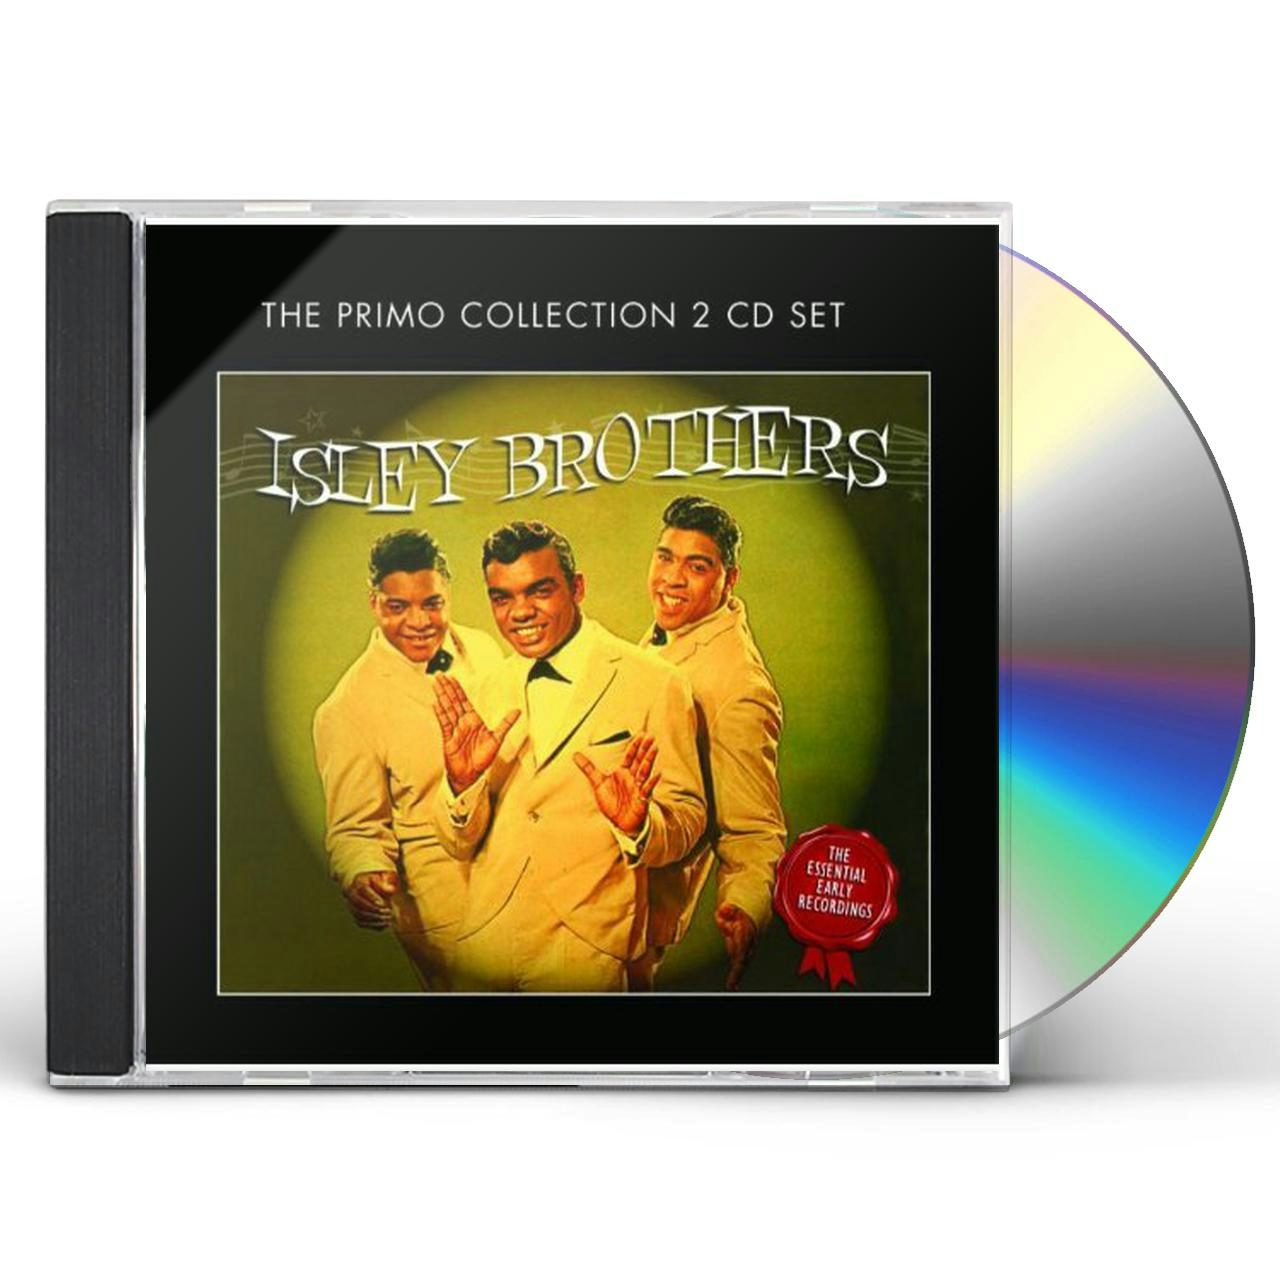 The Isley Brothers ESSENTIAL EARLY RECORDINGS CD